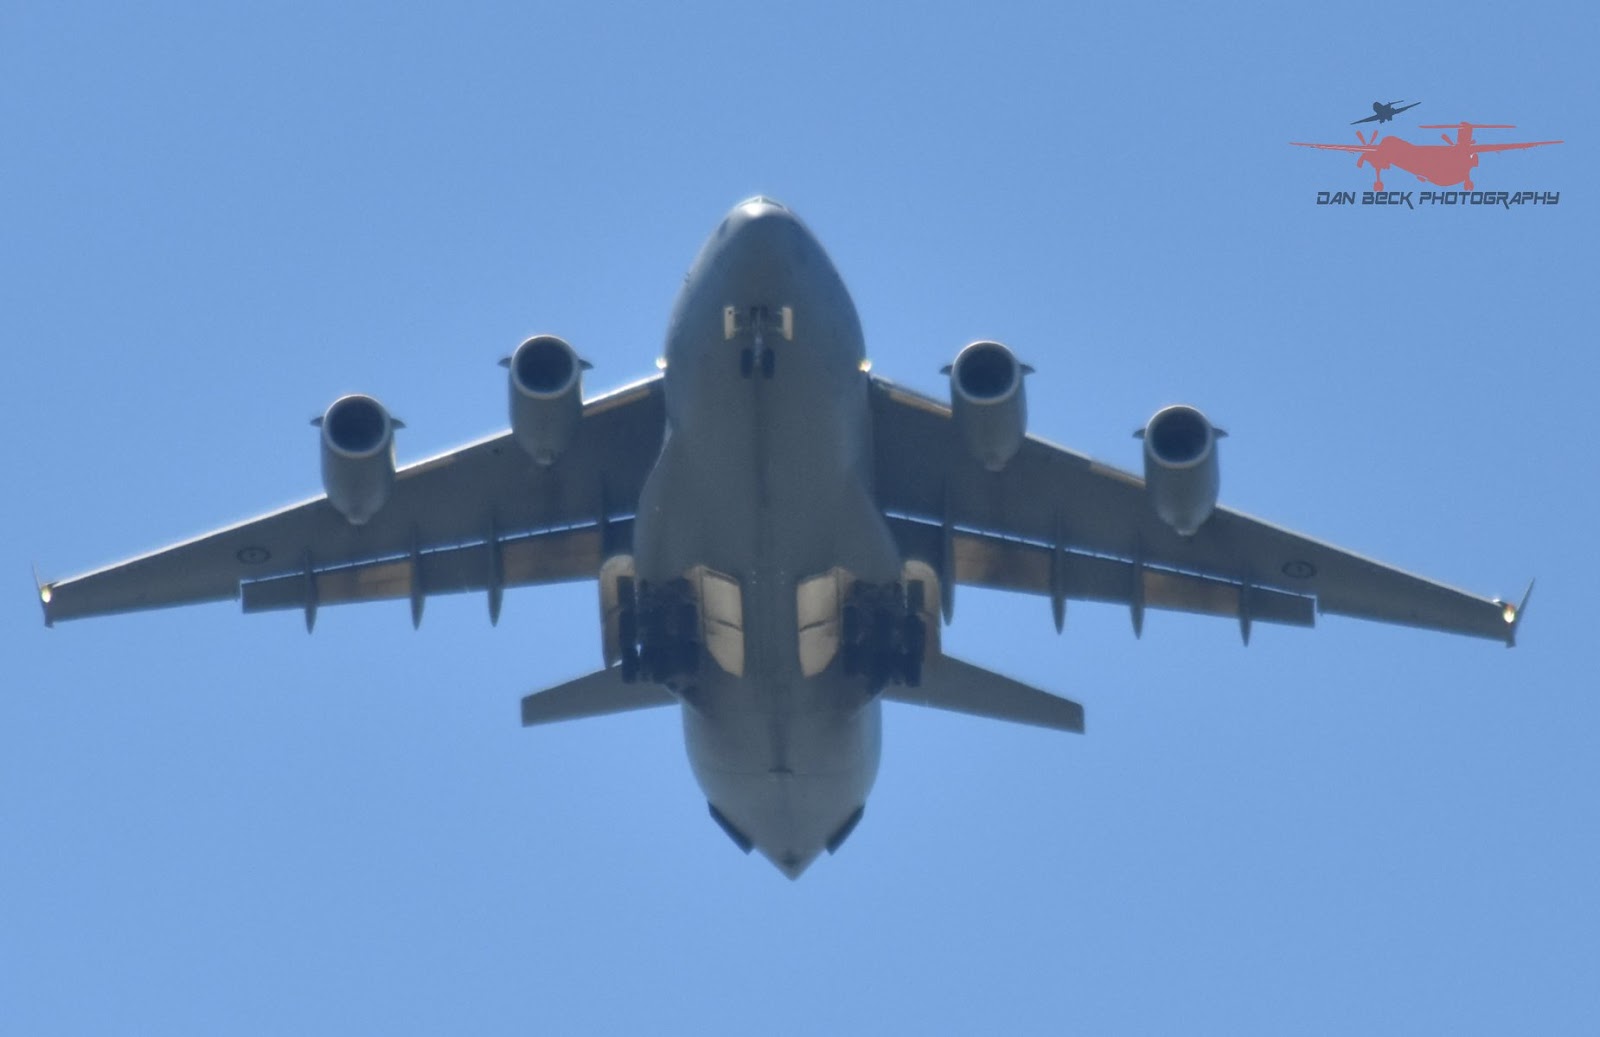 Central Queensland Plane Boeing C-17A Globemaster III A41-213 "Stallion 60” Missed Approach at Bundaberg Airport - Plus More!